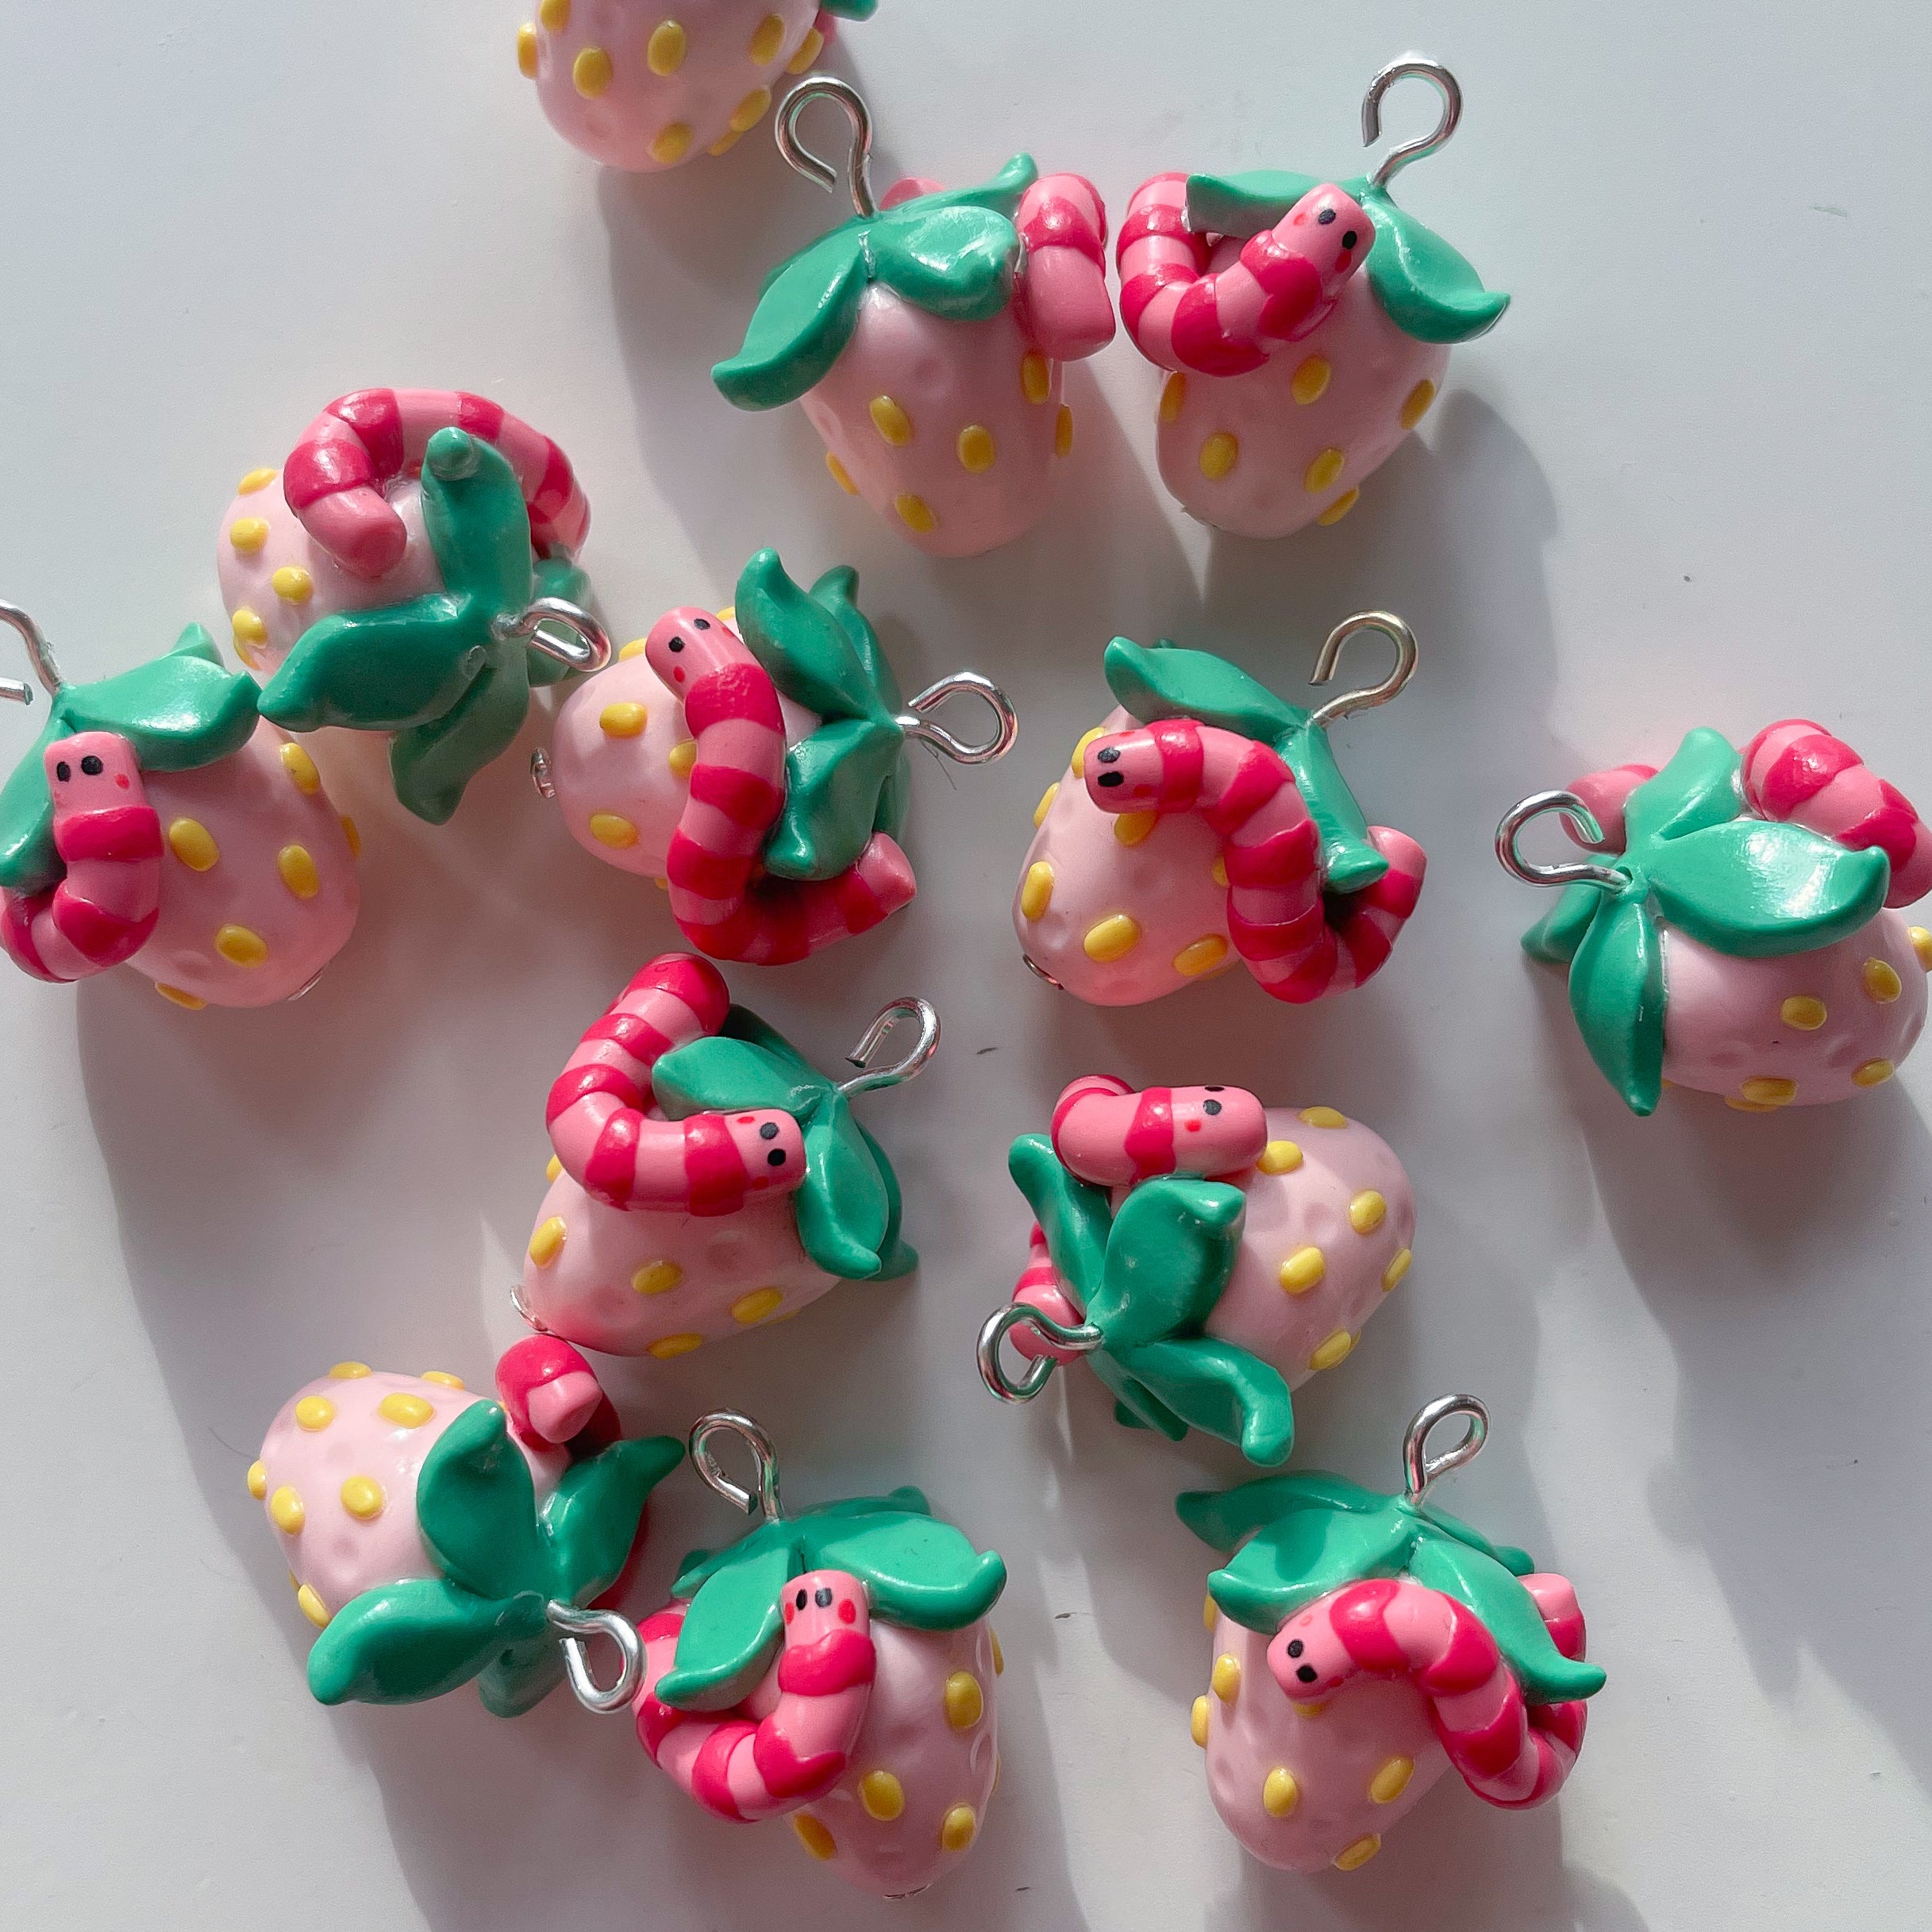 Strawberry Worms - Earrings Only